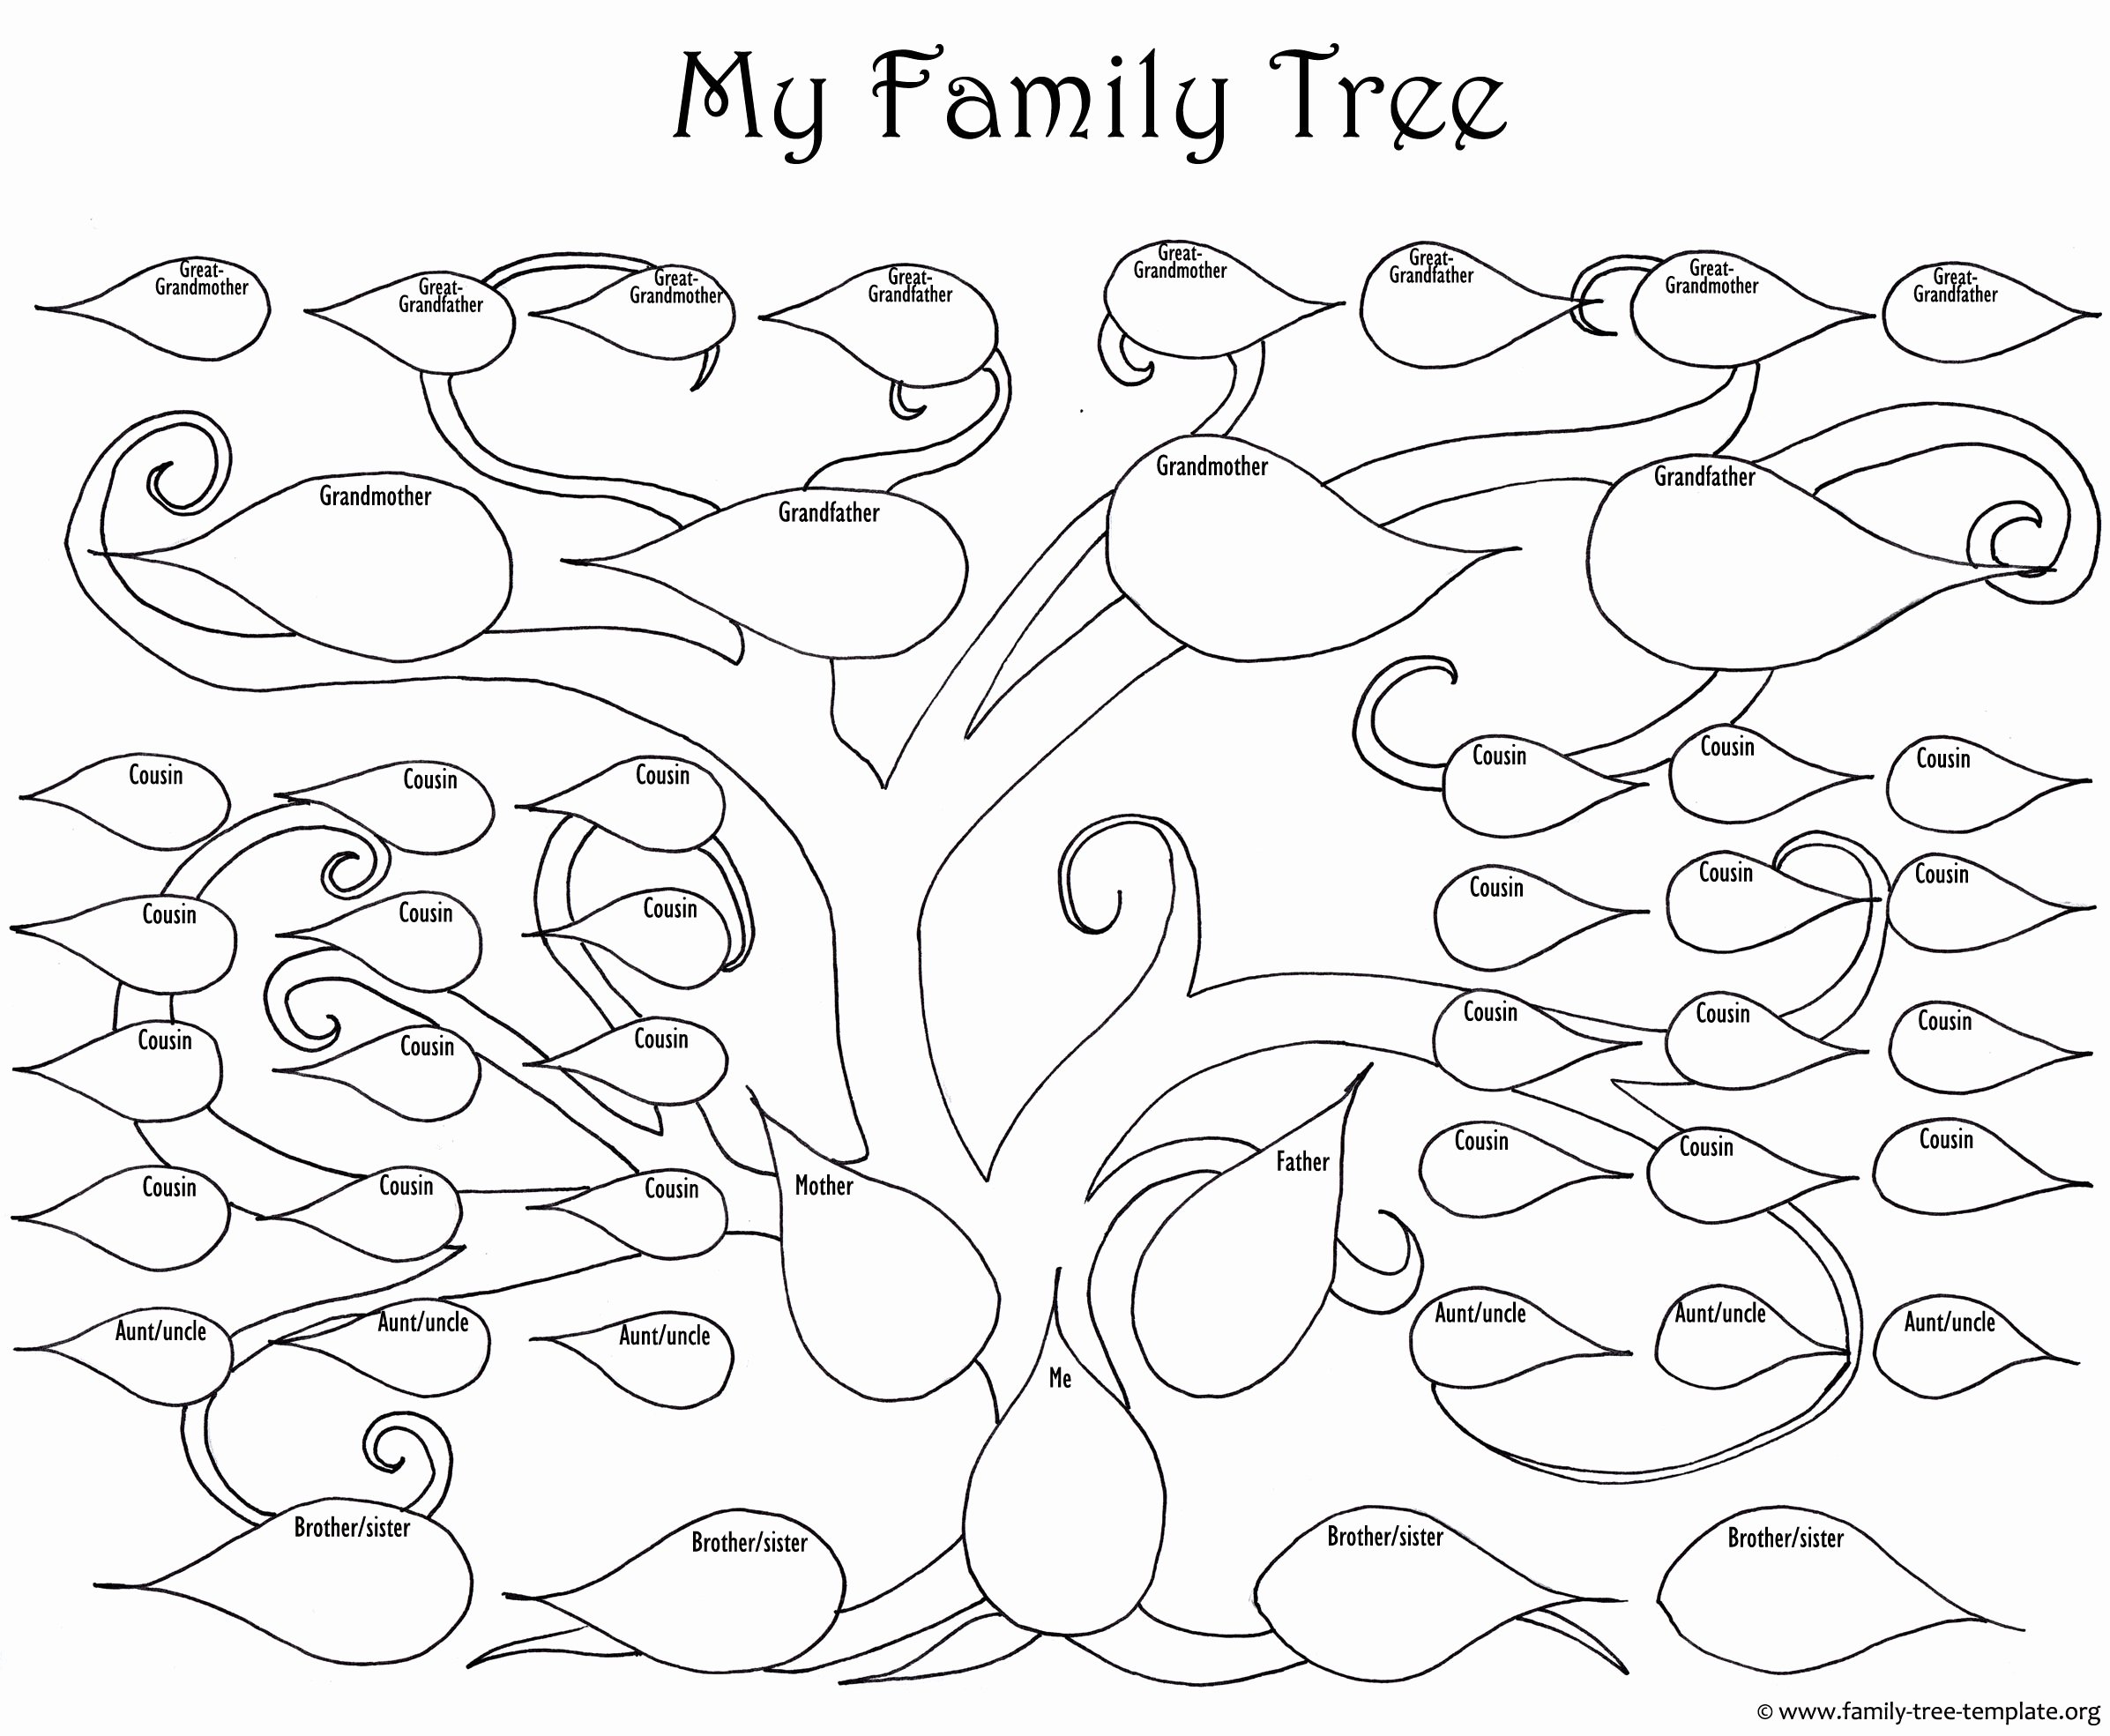 Large Family Tree Template Beautiful A Printable Blank Family Tree to Make Your Kids Genealogy